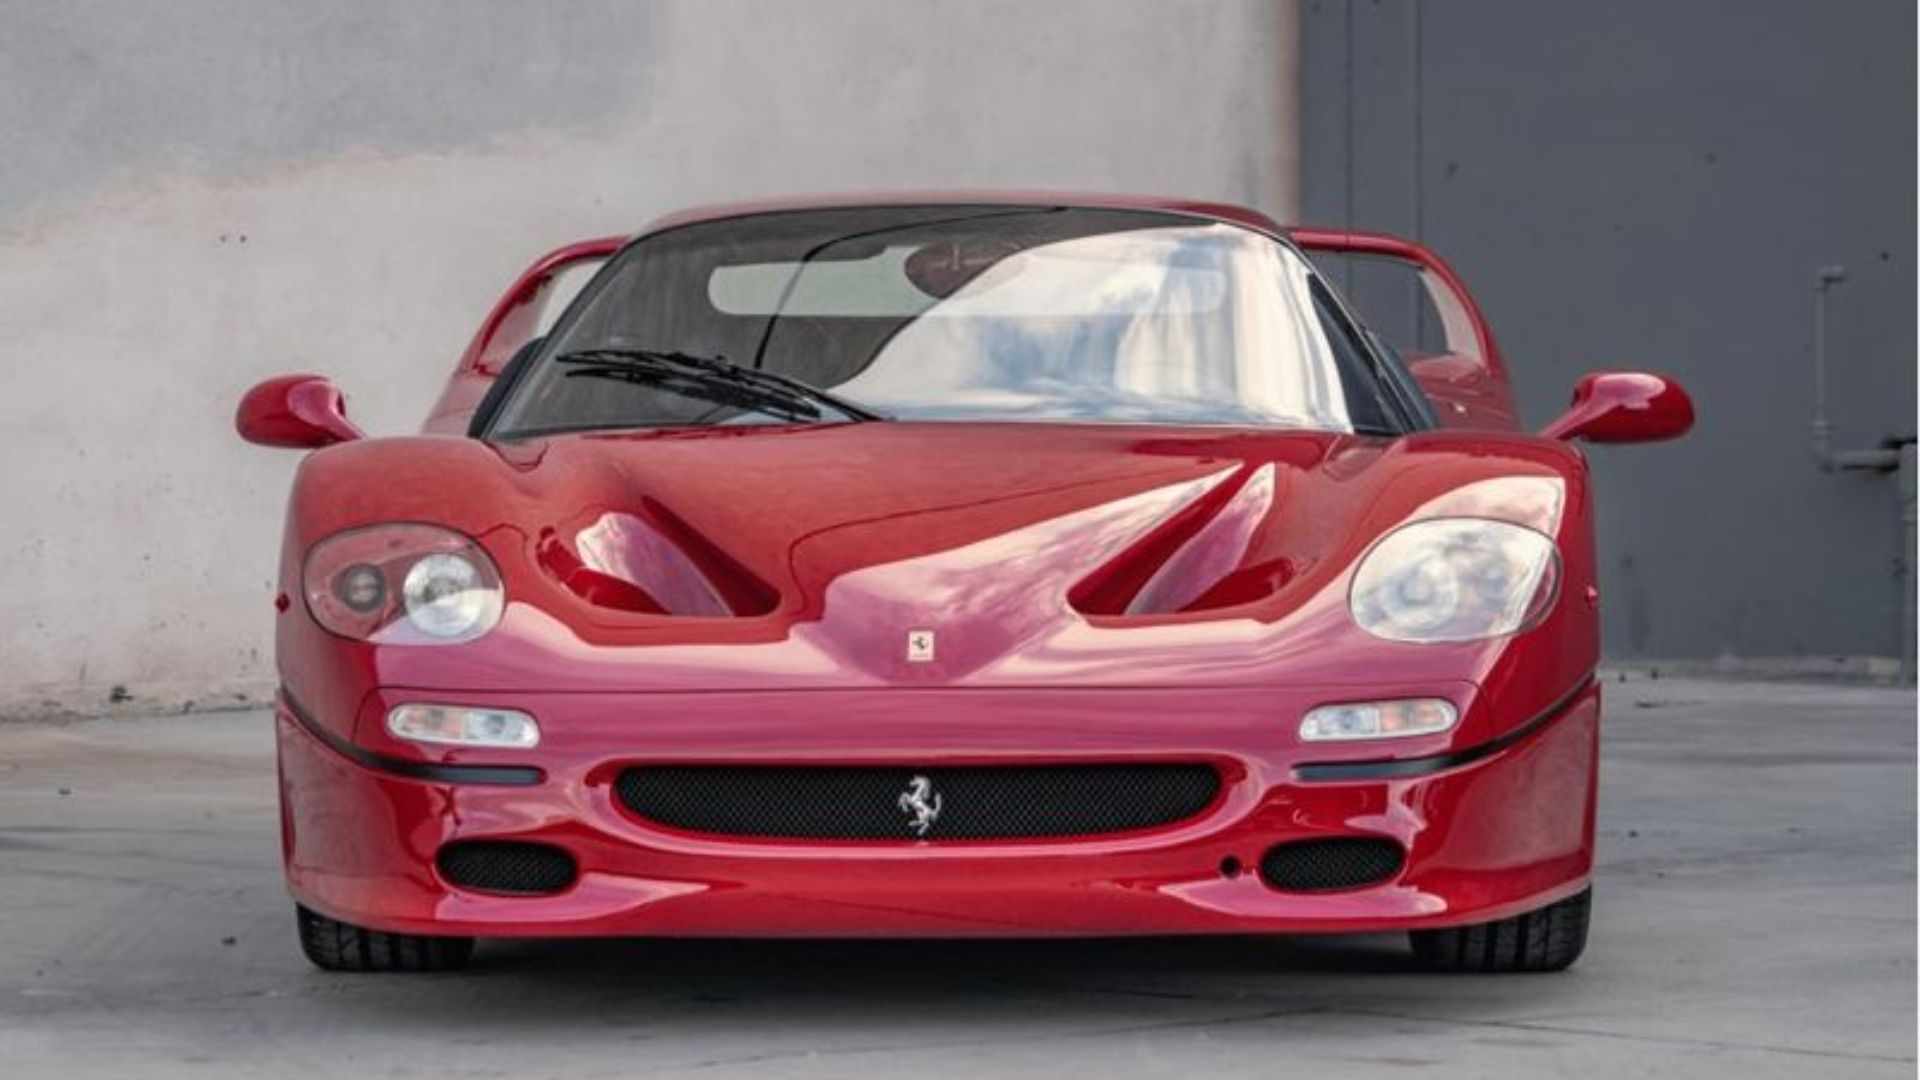 1995 Ferrari F50 Sells for €5.5 Million in Crypto in Record-Breaking Auction